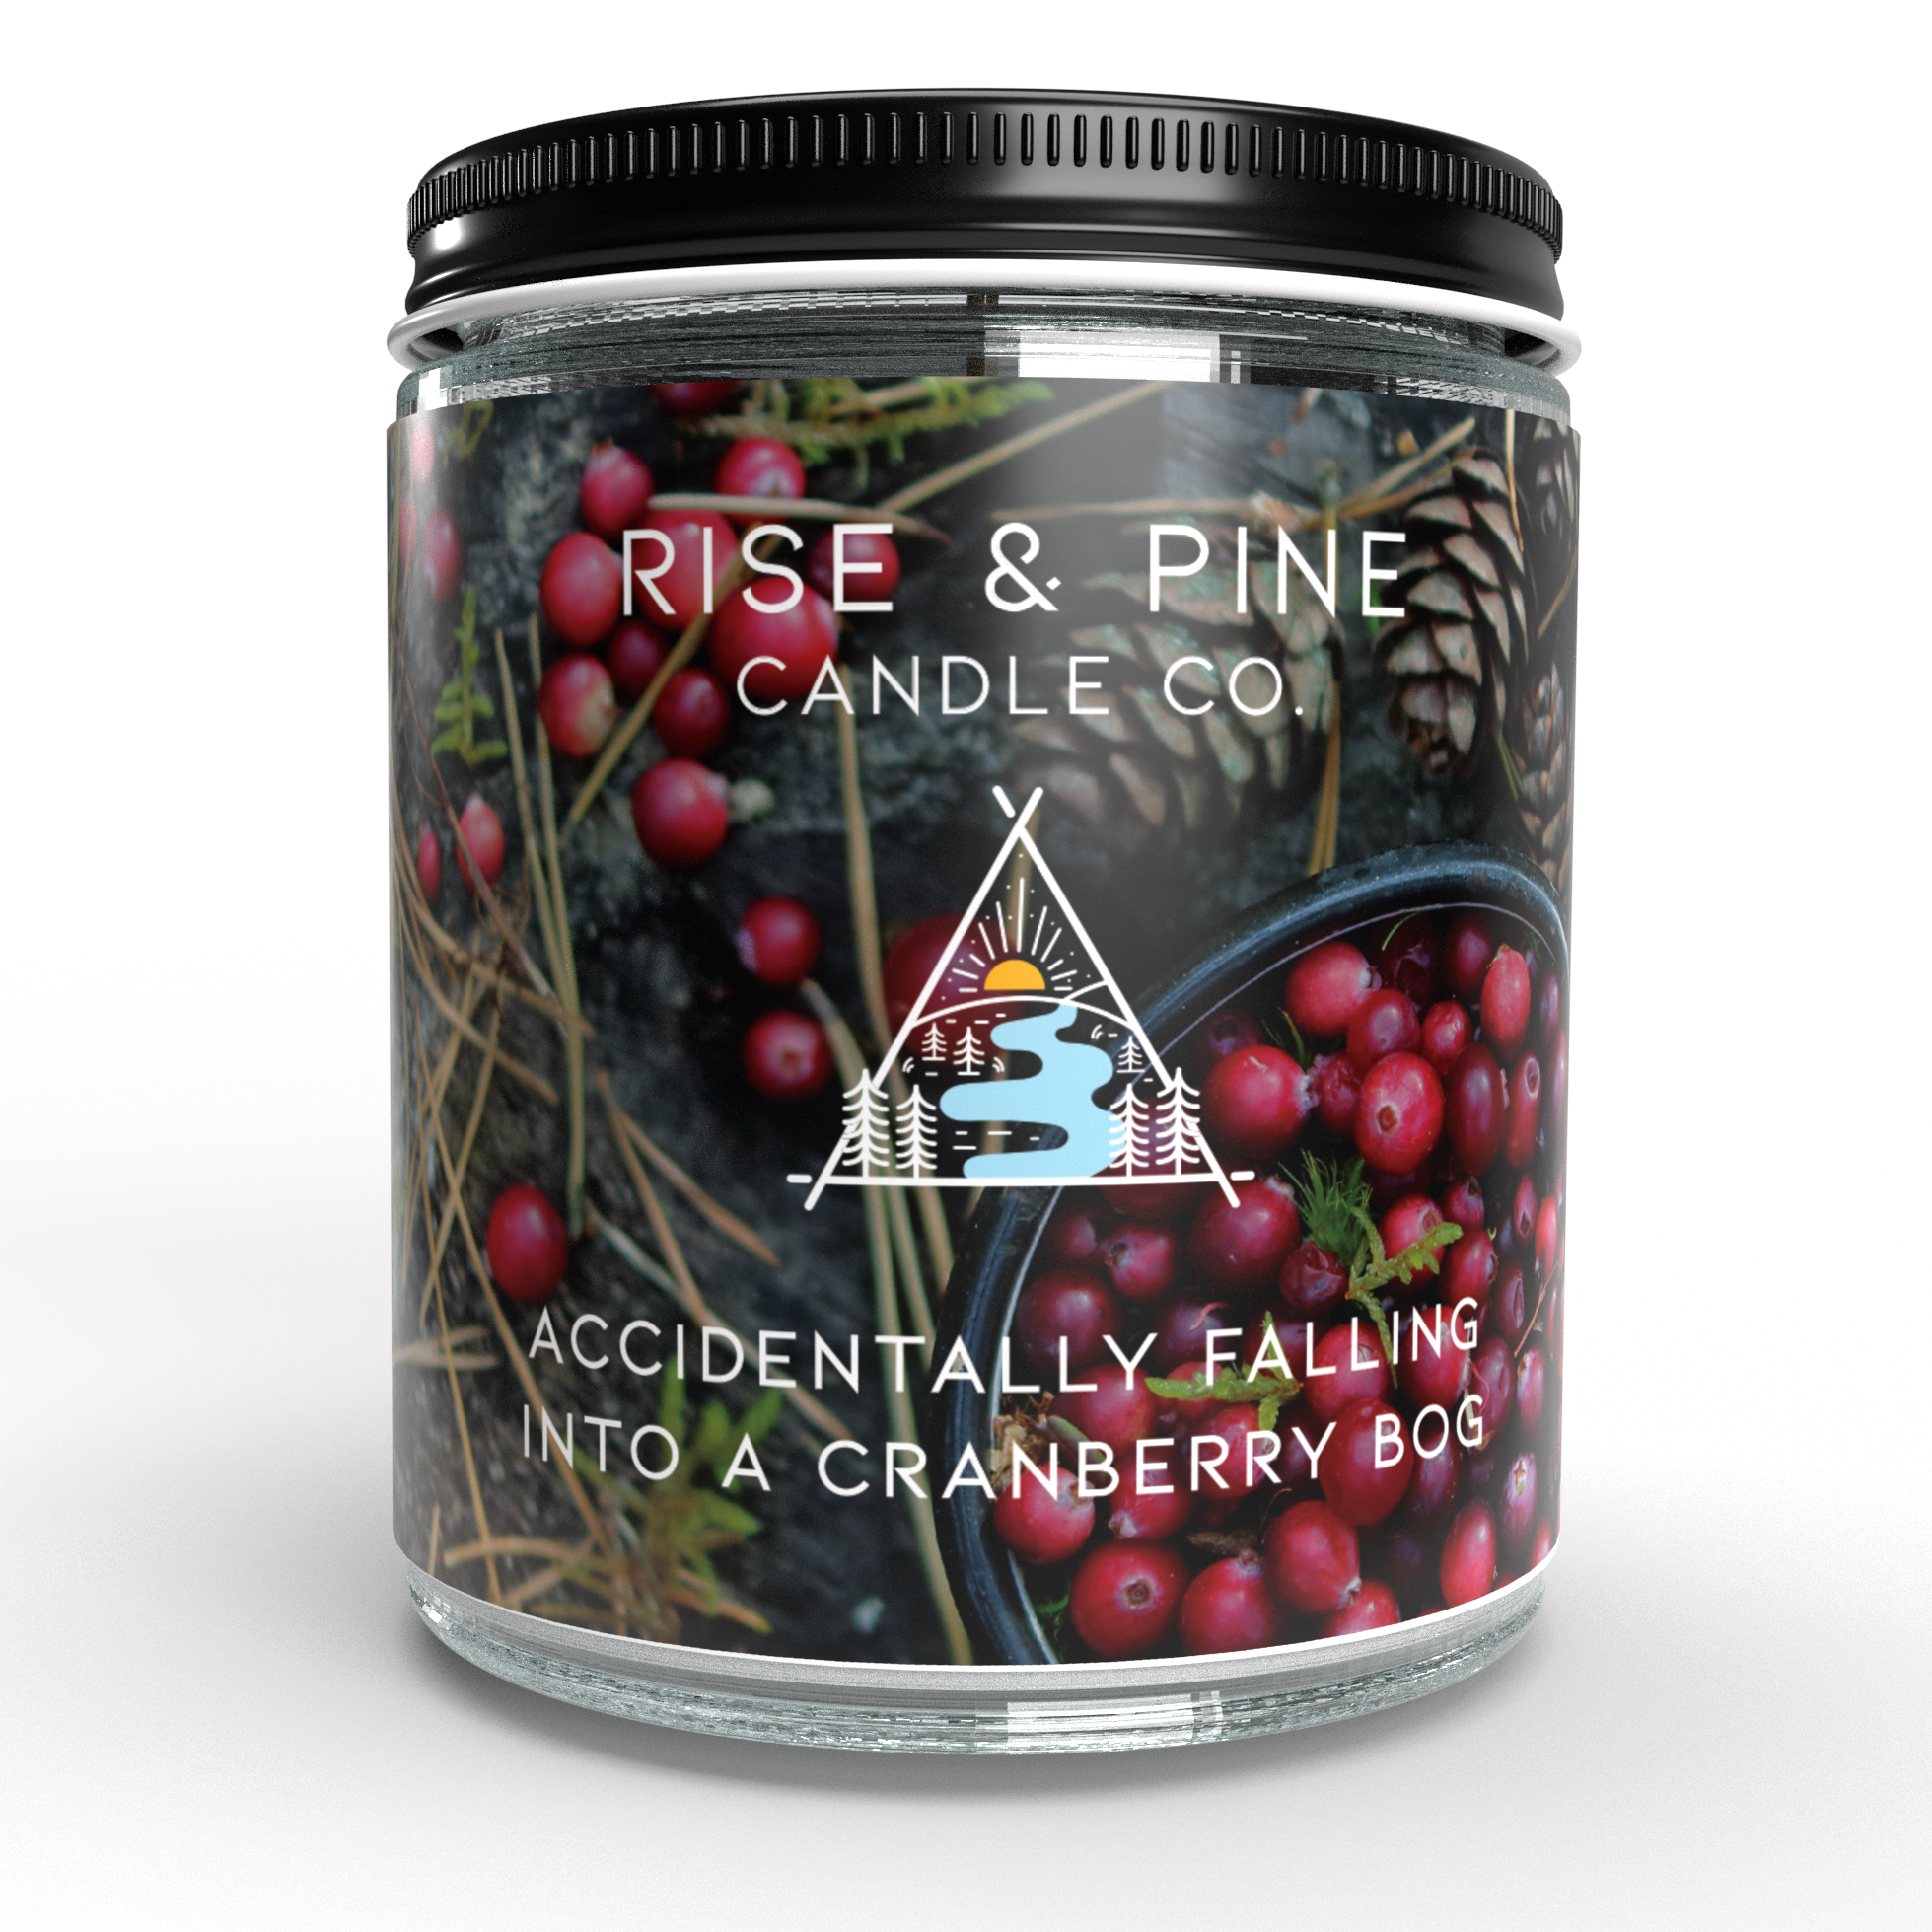 Cranberry Woods Soy Wax Candle